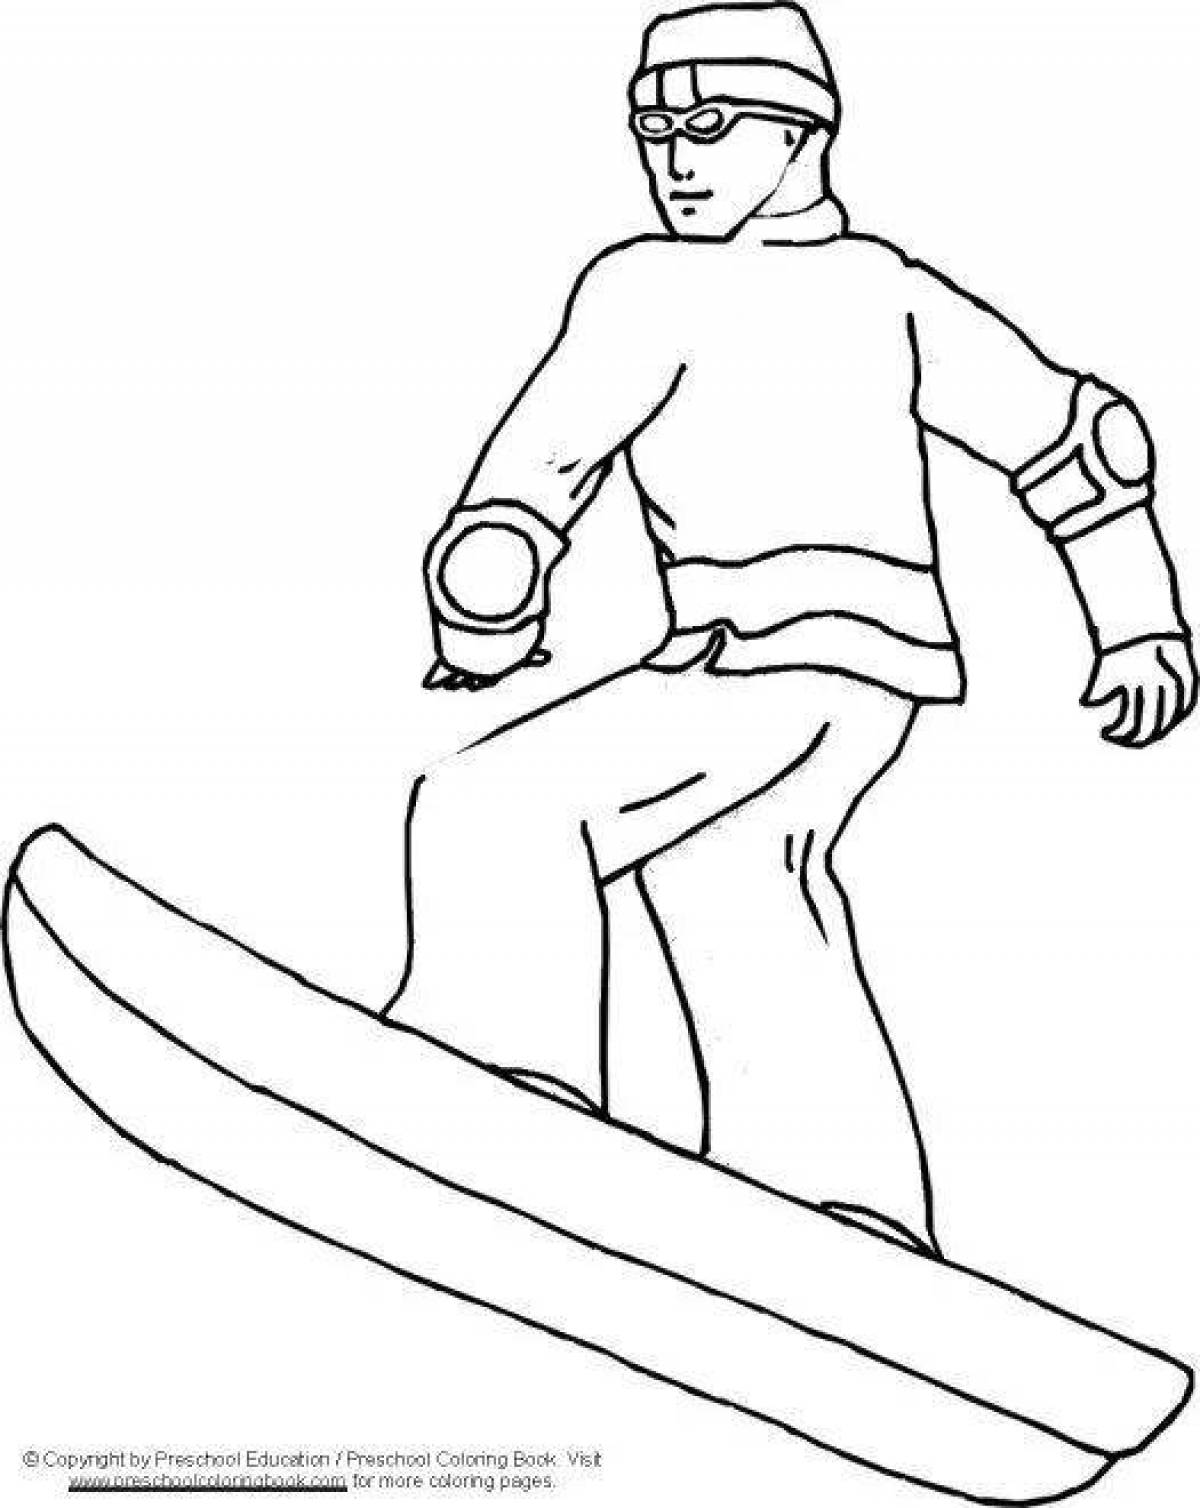 Coloring book brave snowboarder